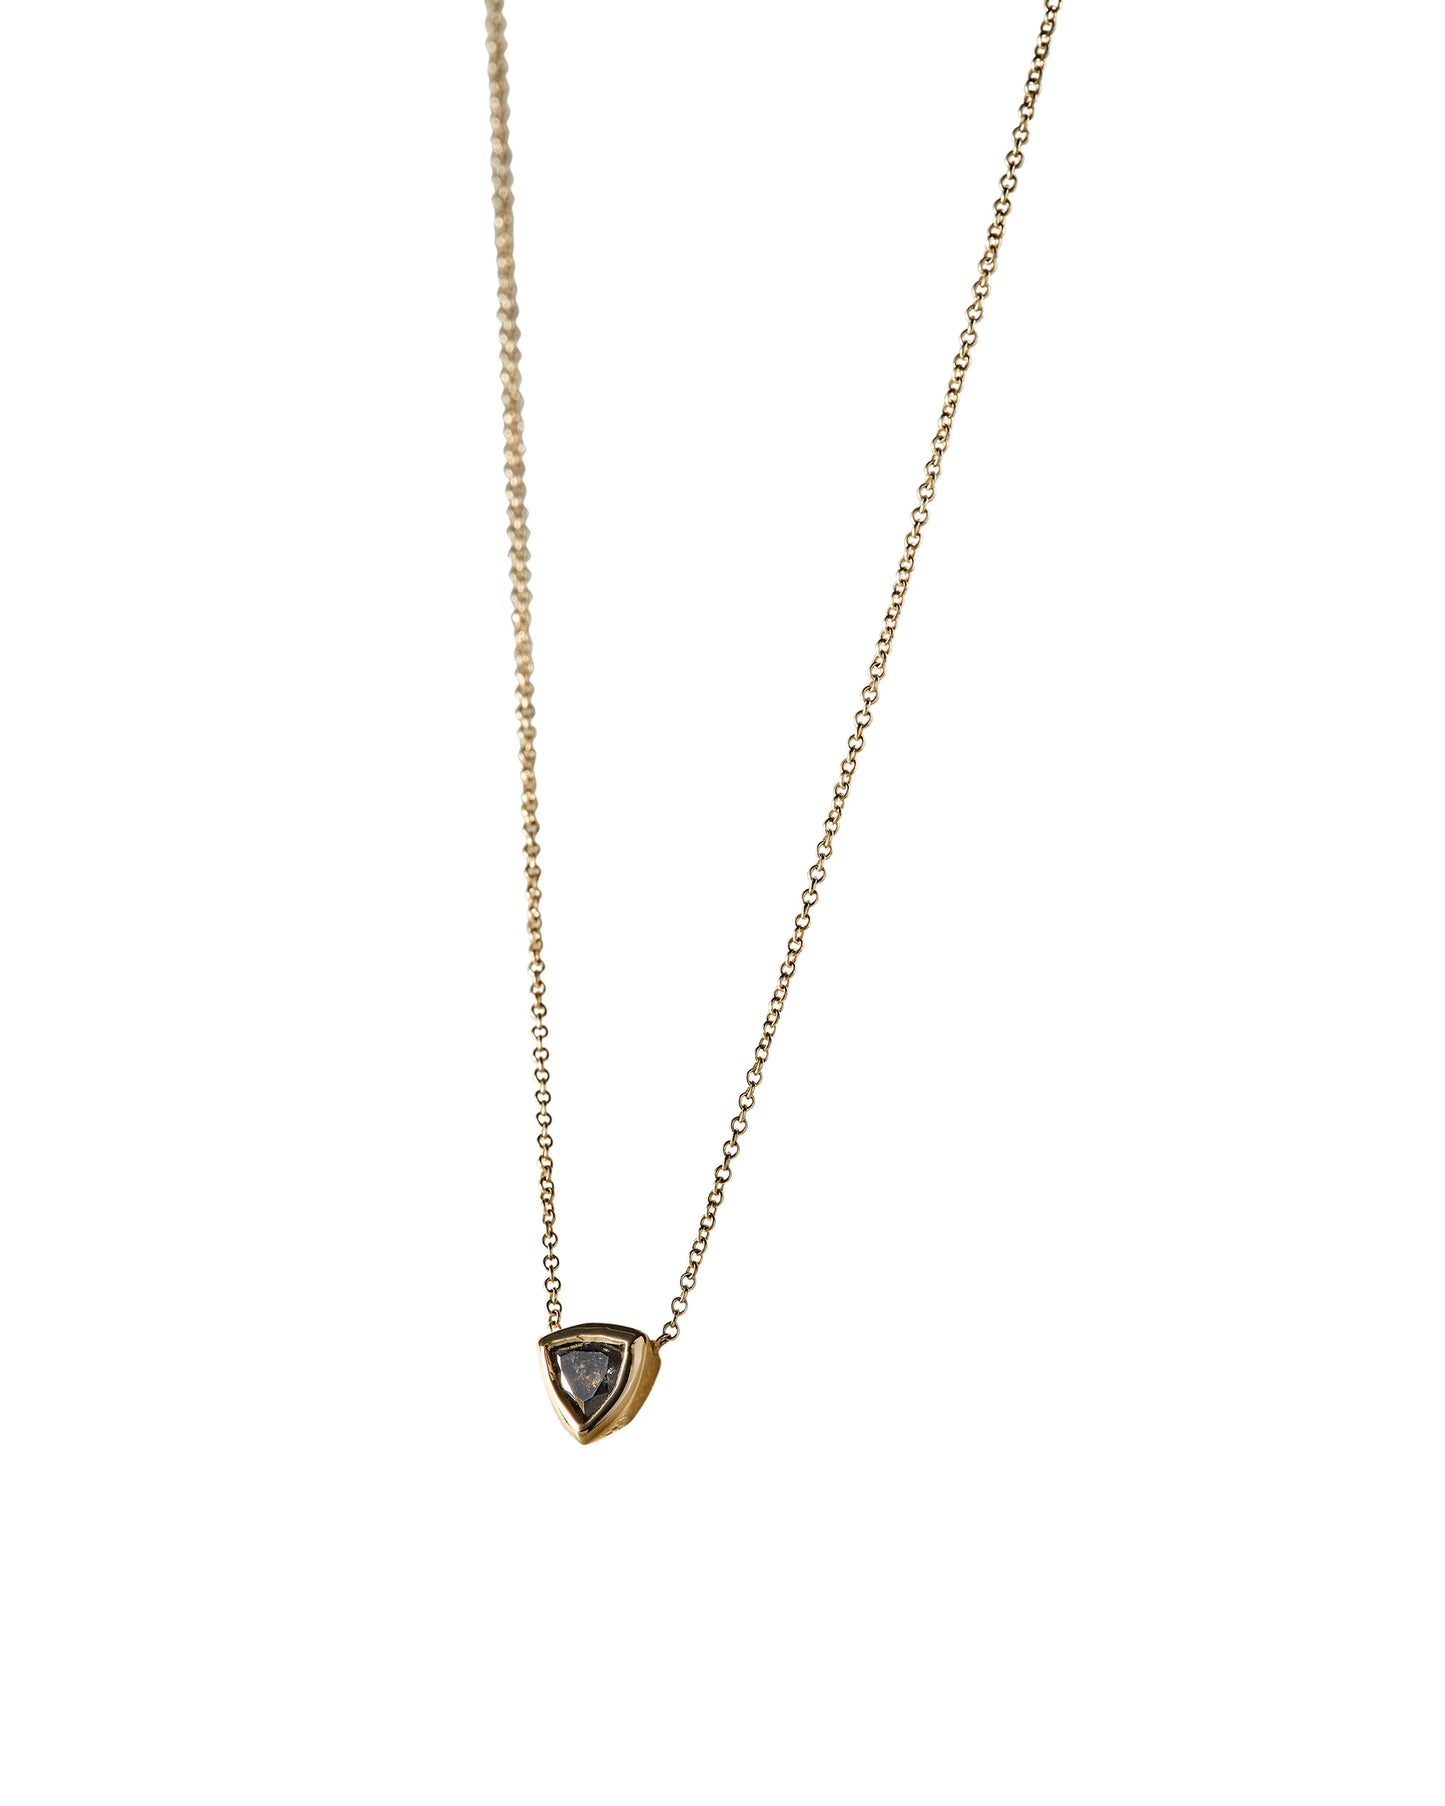 salt and pepper diamond and gold necklace